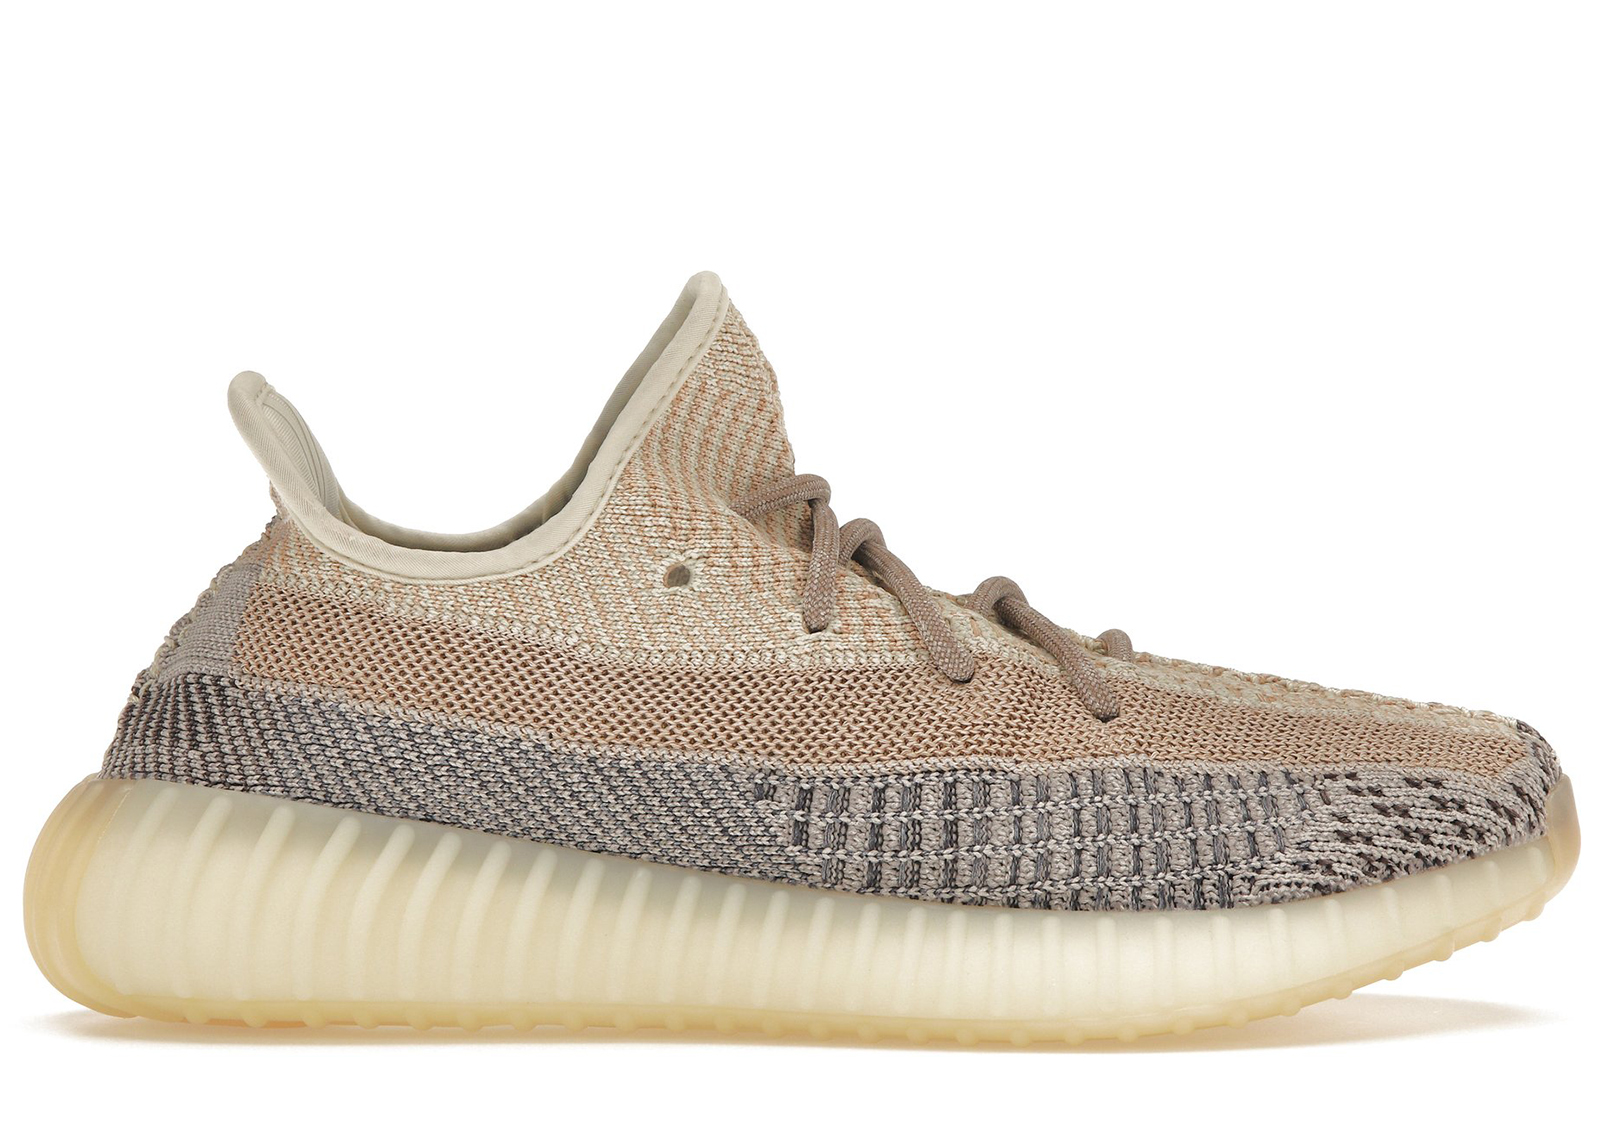 adidas Yeezy Boost 350 V2 Ash Pearl Men's - GY7658 - US